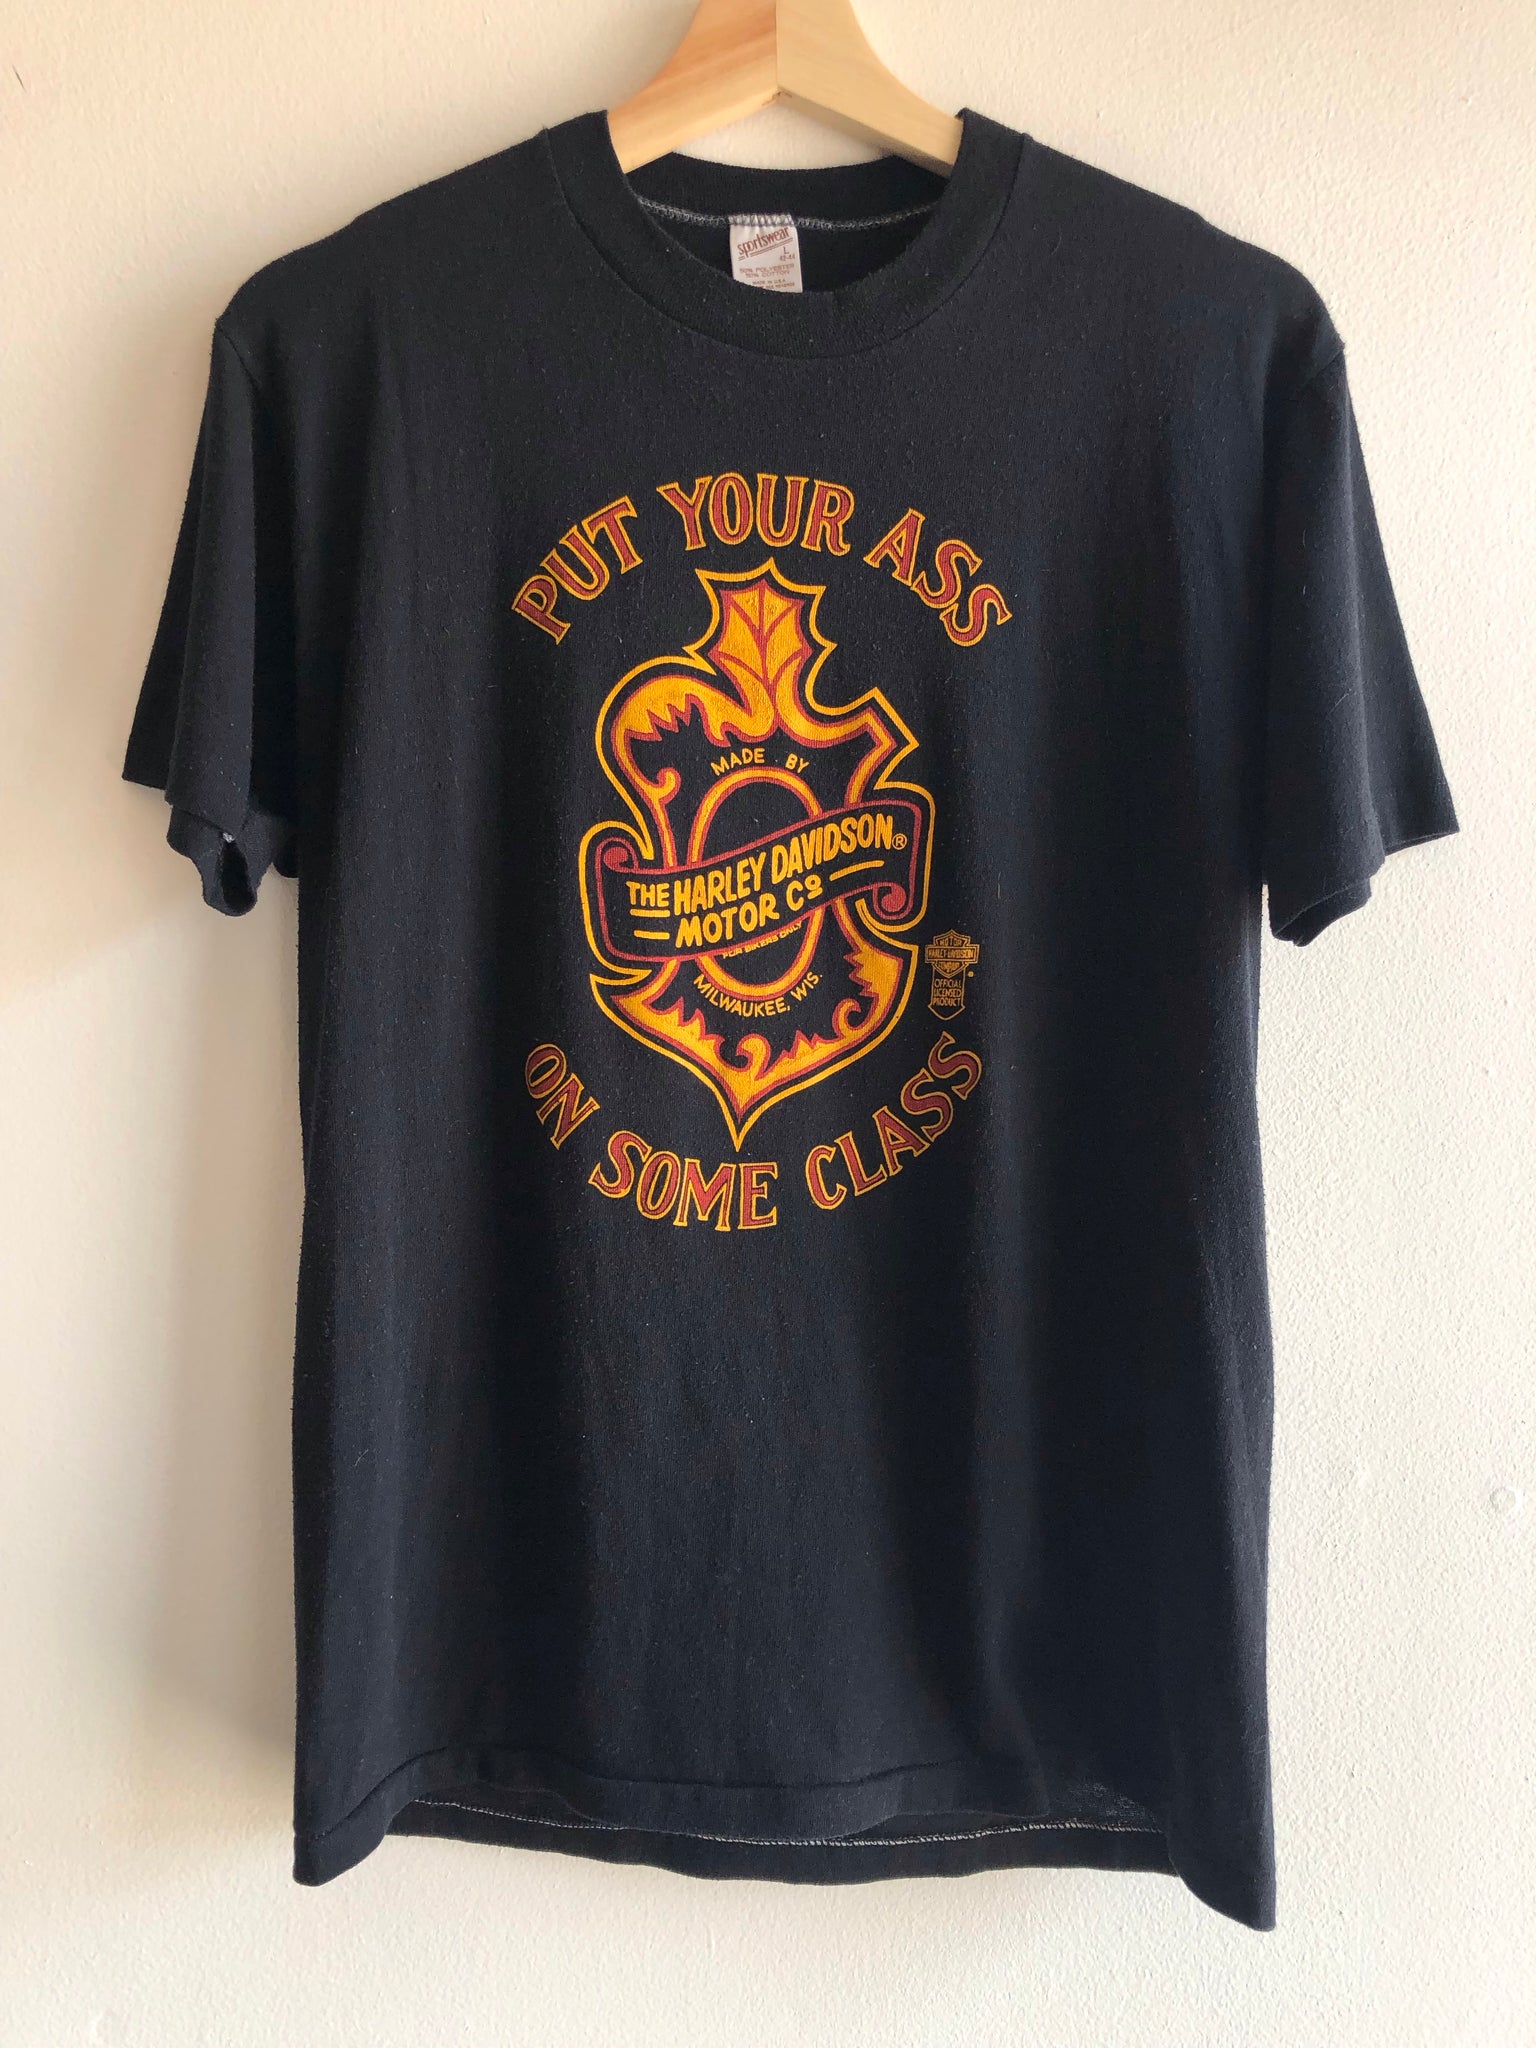 Vintage Harley Davidson “ Put Your Ass On Some Class “ Shirt